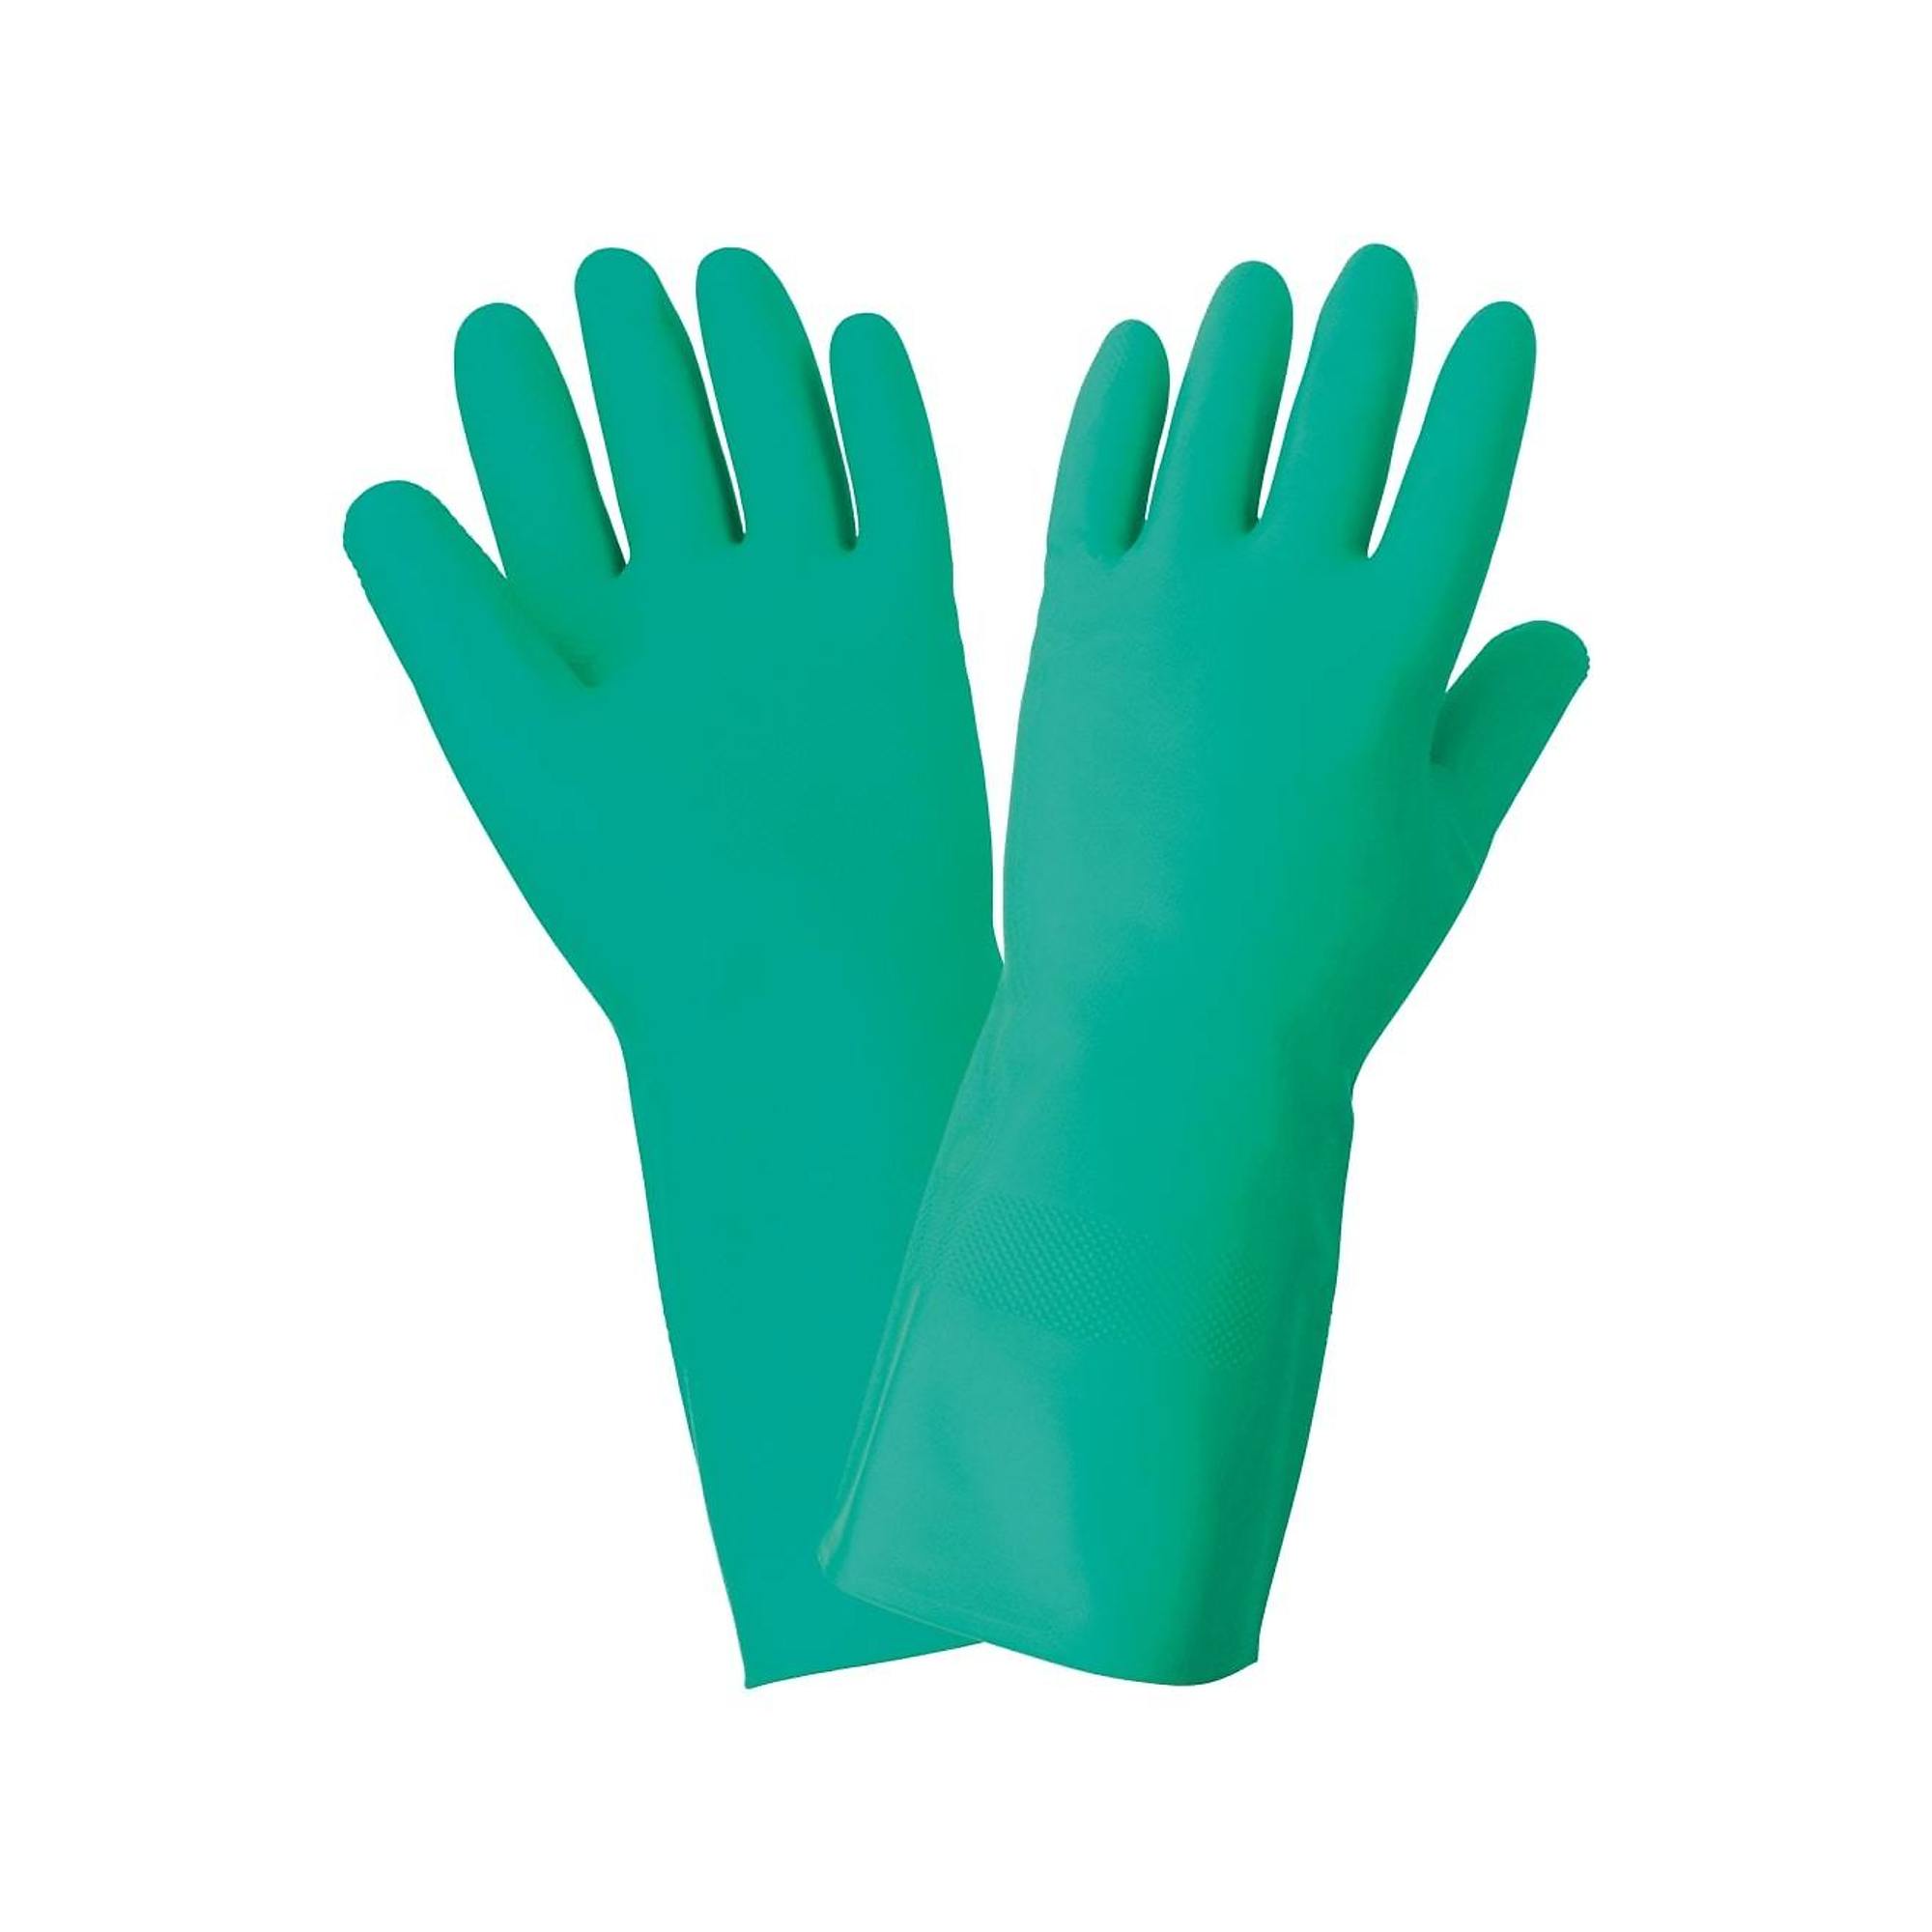 FrogWear, 12-Mil, 13Inch, Unlined, Nitrile Diamond Grip Gloves - 12 Pairs, Size XL, Color Green, Included (qty.) 12 Model 515-10(XL)